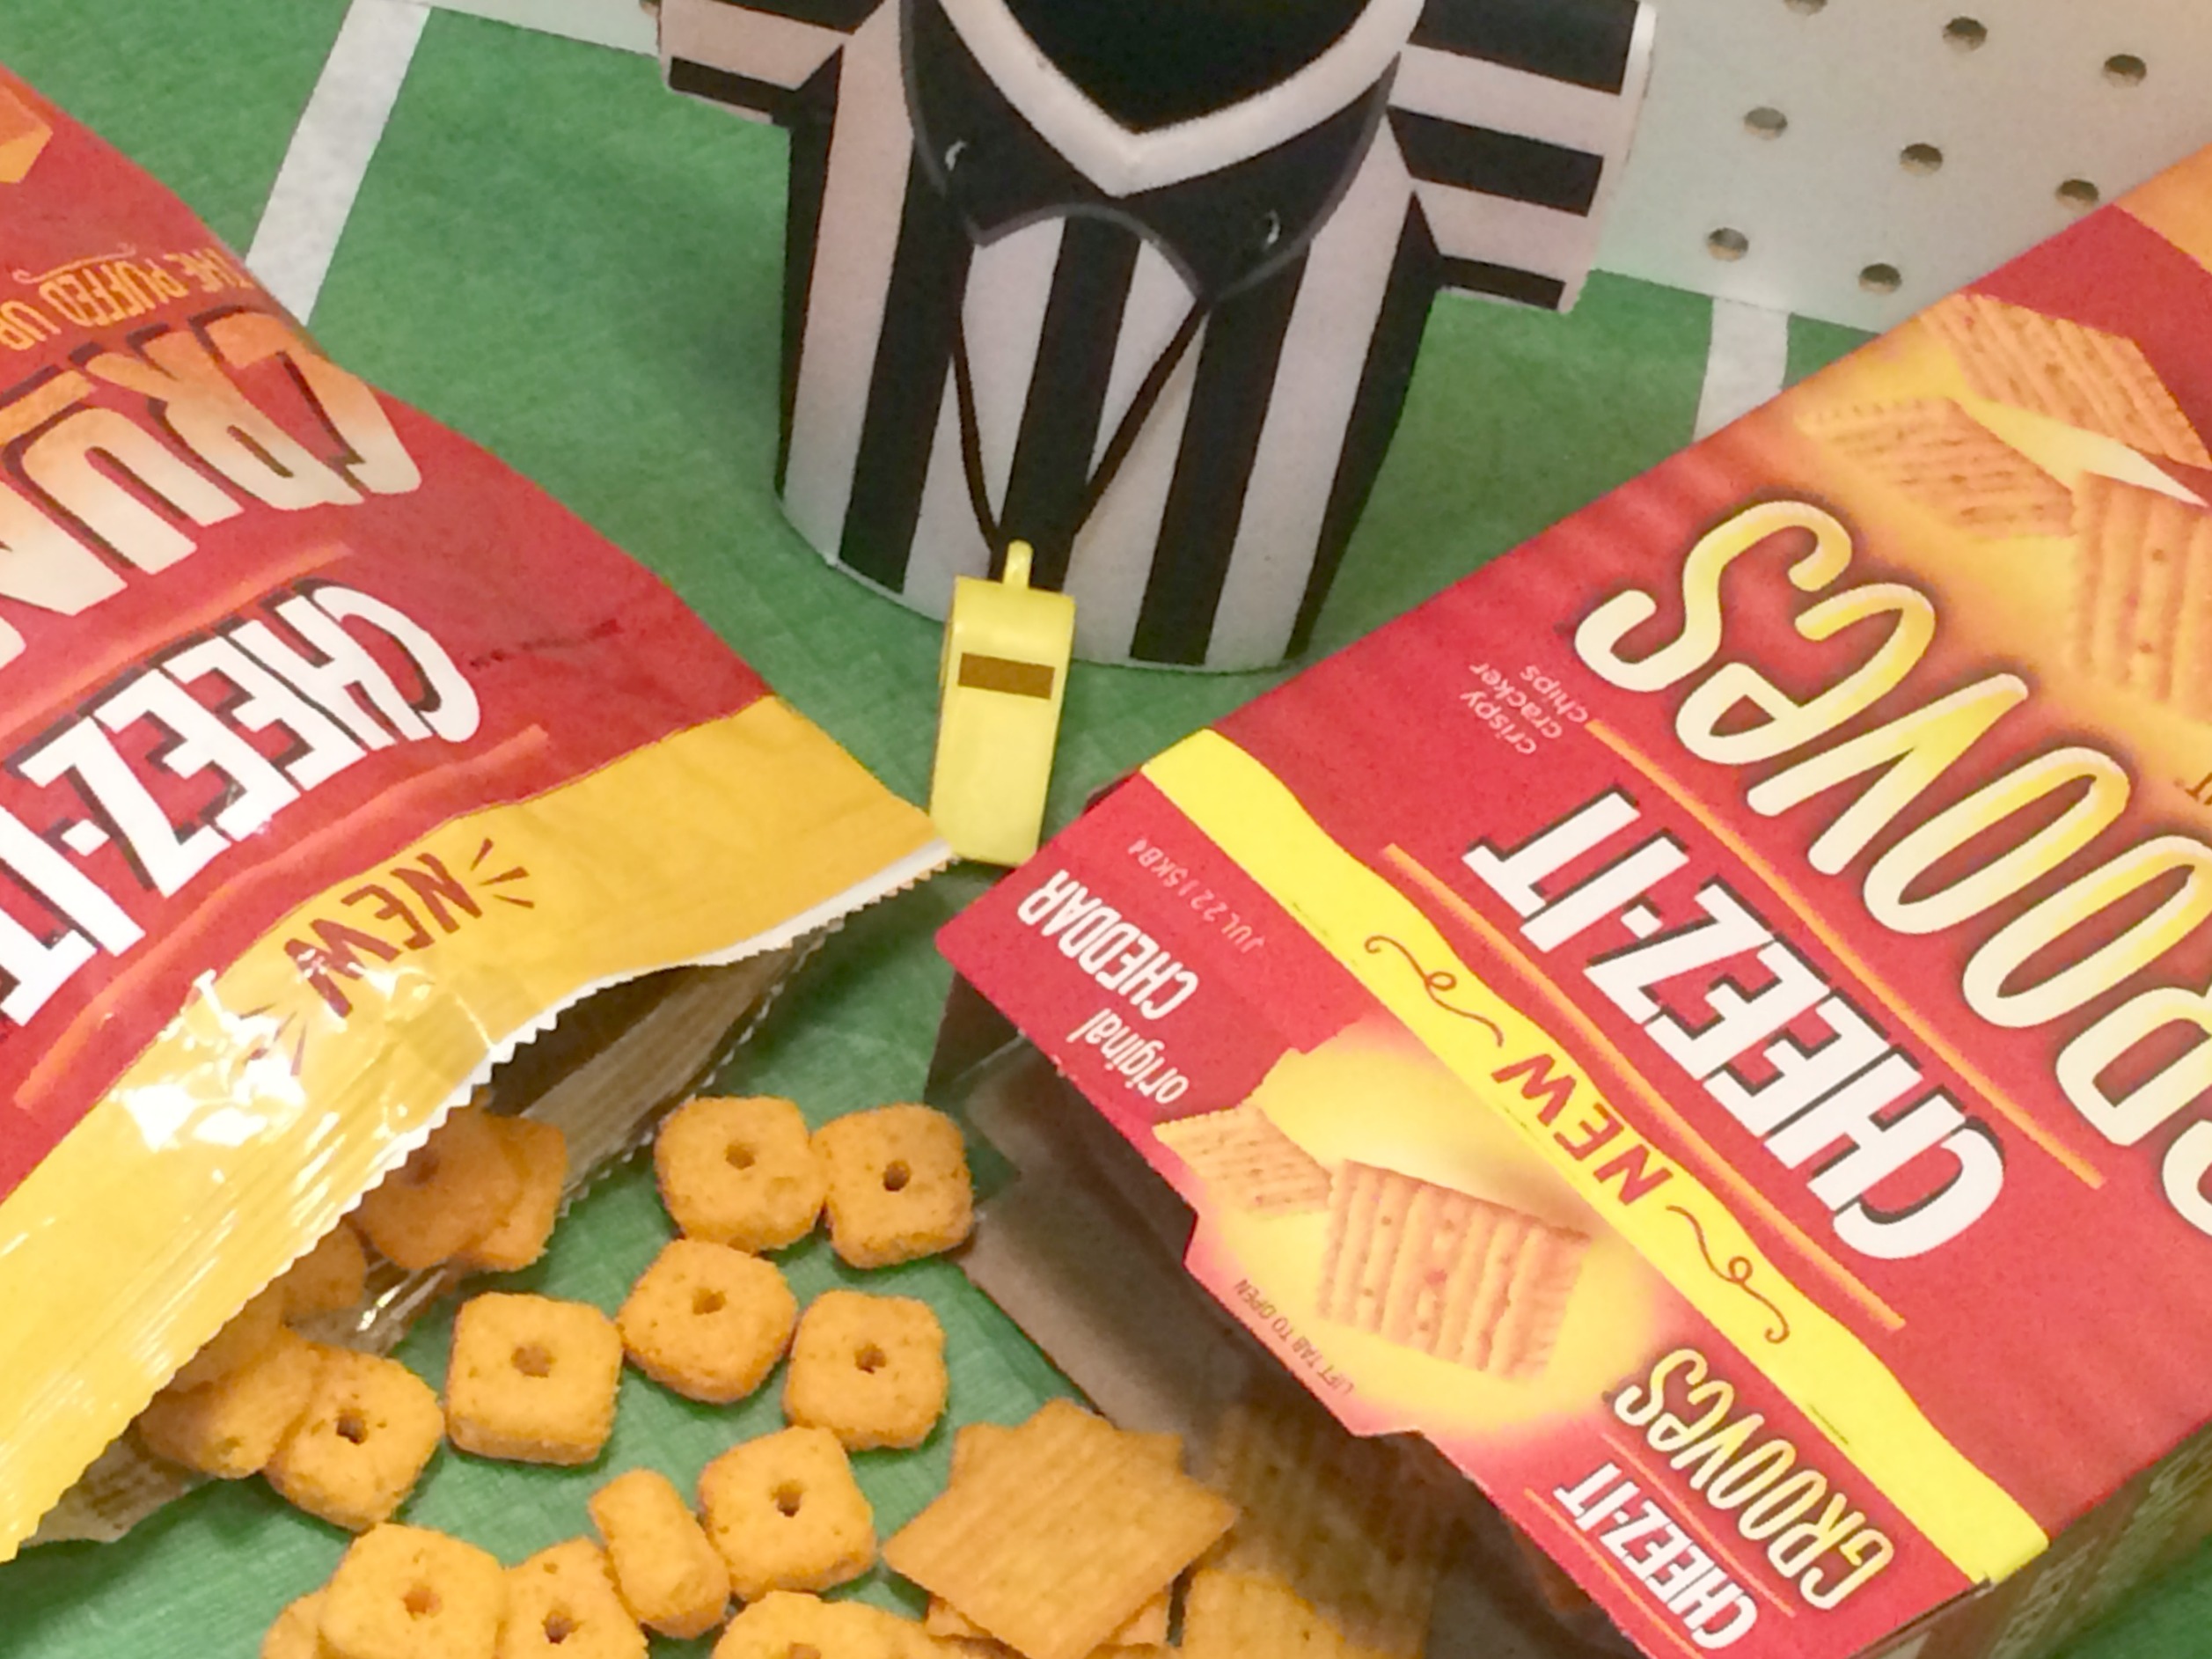 Score Big on Game Day with CheezIt and Chocolate Dipped "Football